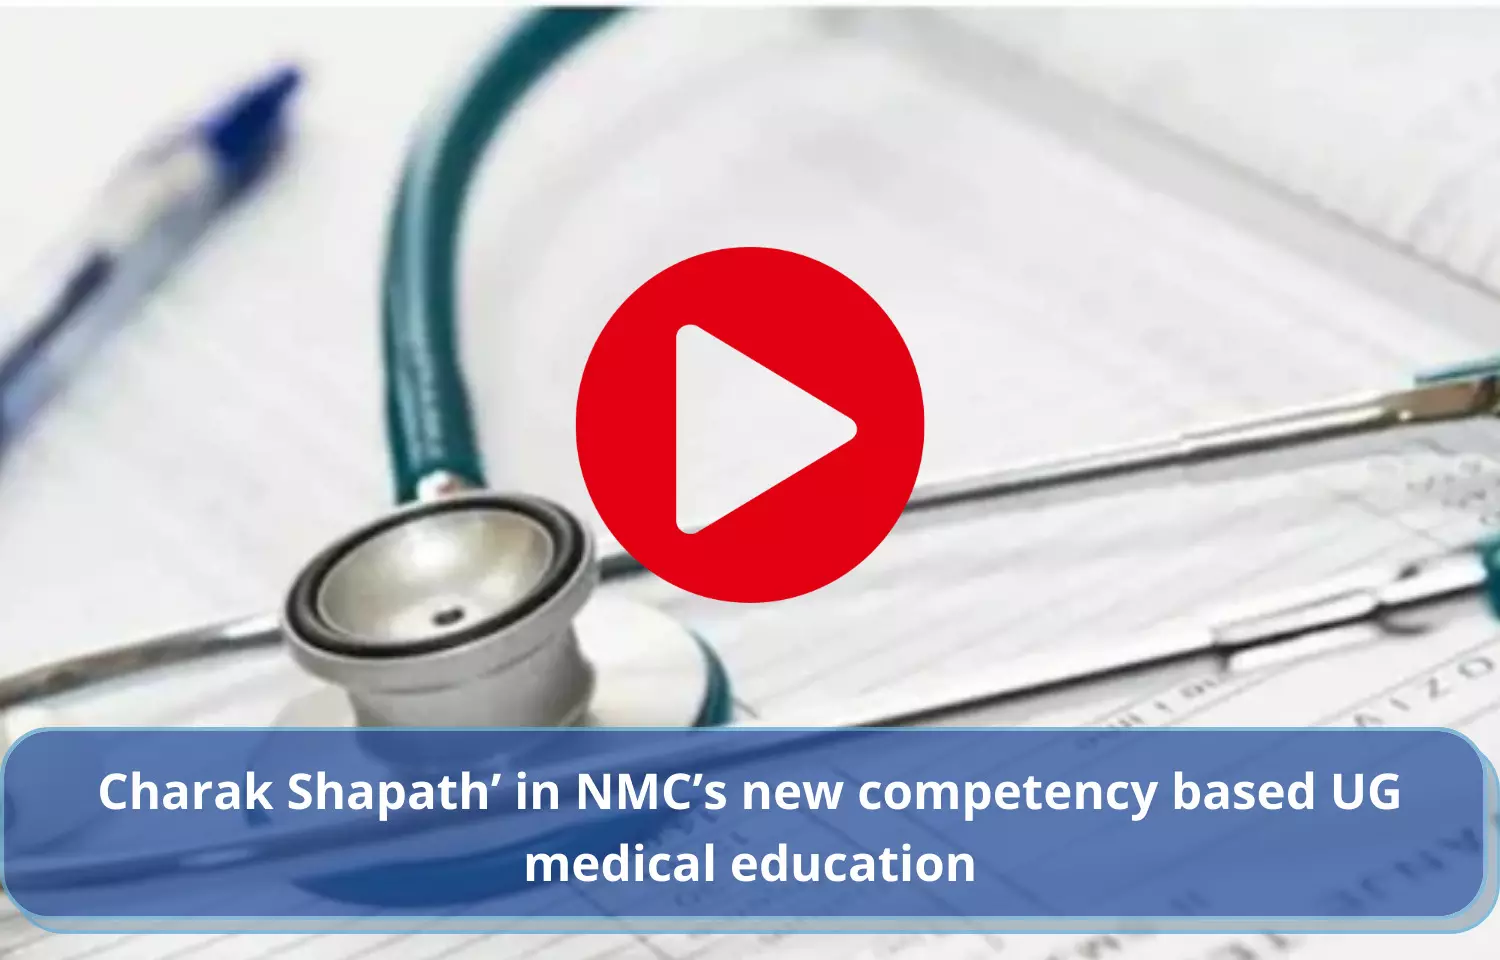 Charak Shapath in NMCs new competency based UG medical education